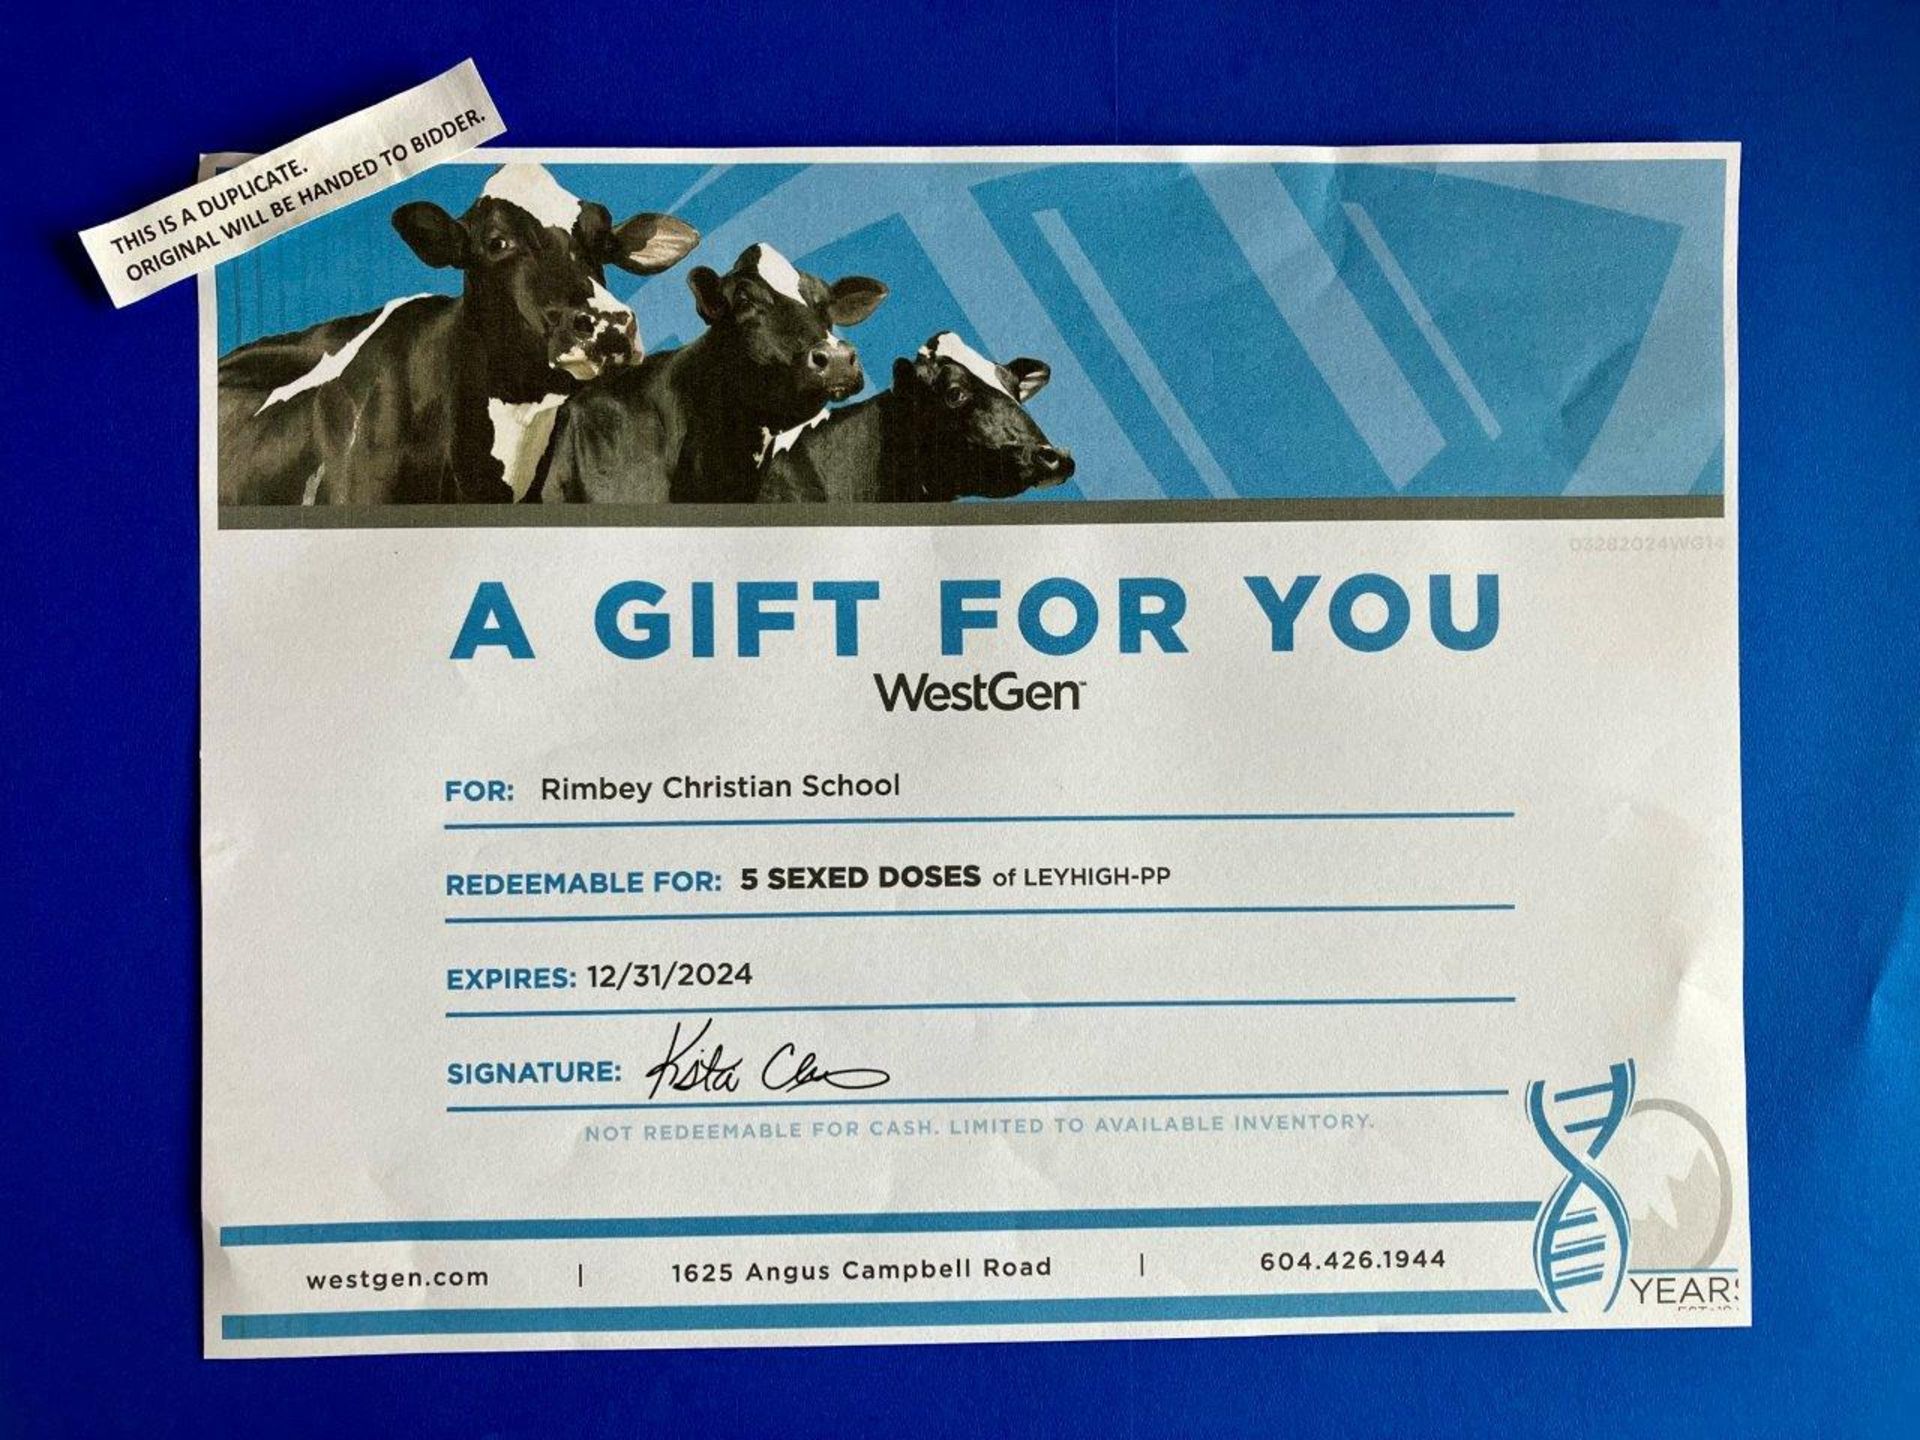 WESTGEN GIFT CERTIFICATE: 5 SEXED DOSES OF LEYHIGH-PP